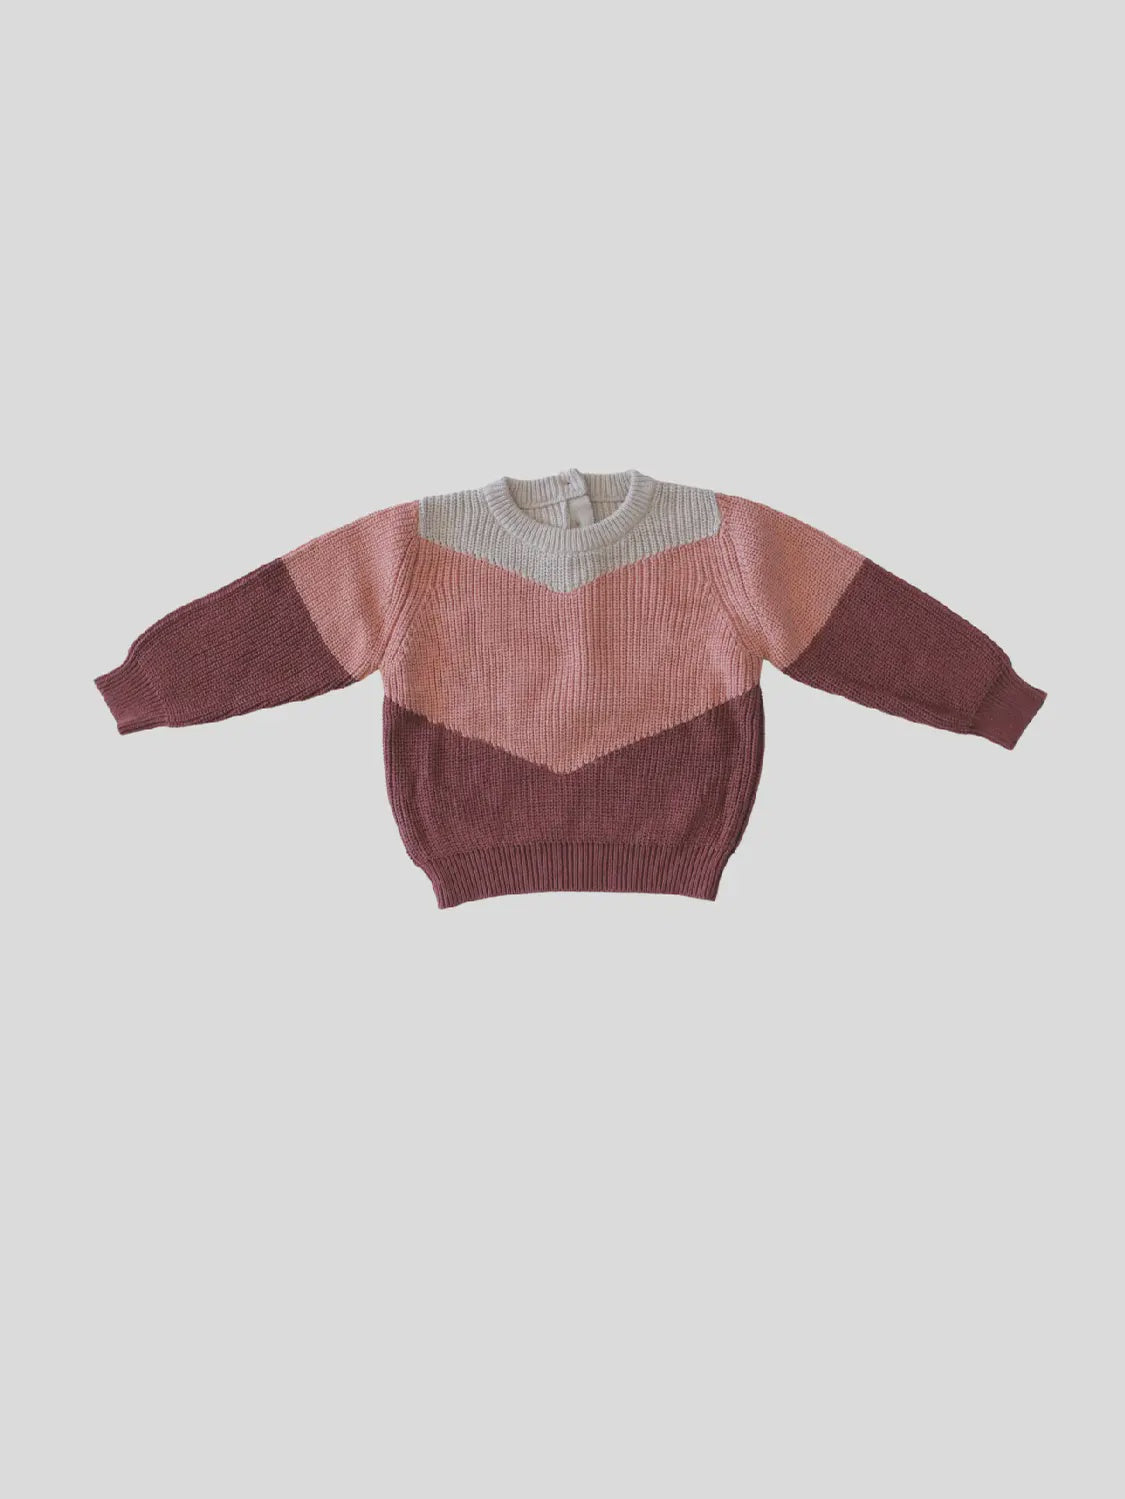 Tri-Color Knit Berry Sweater